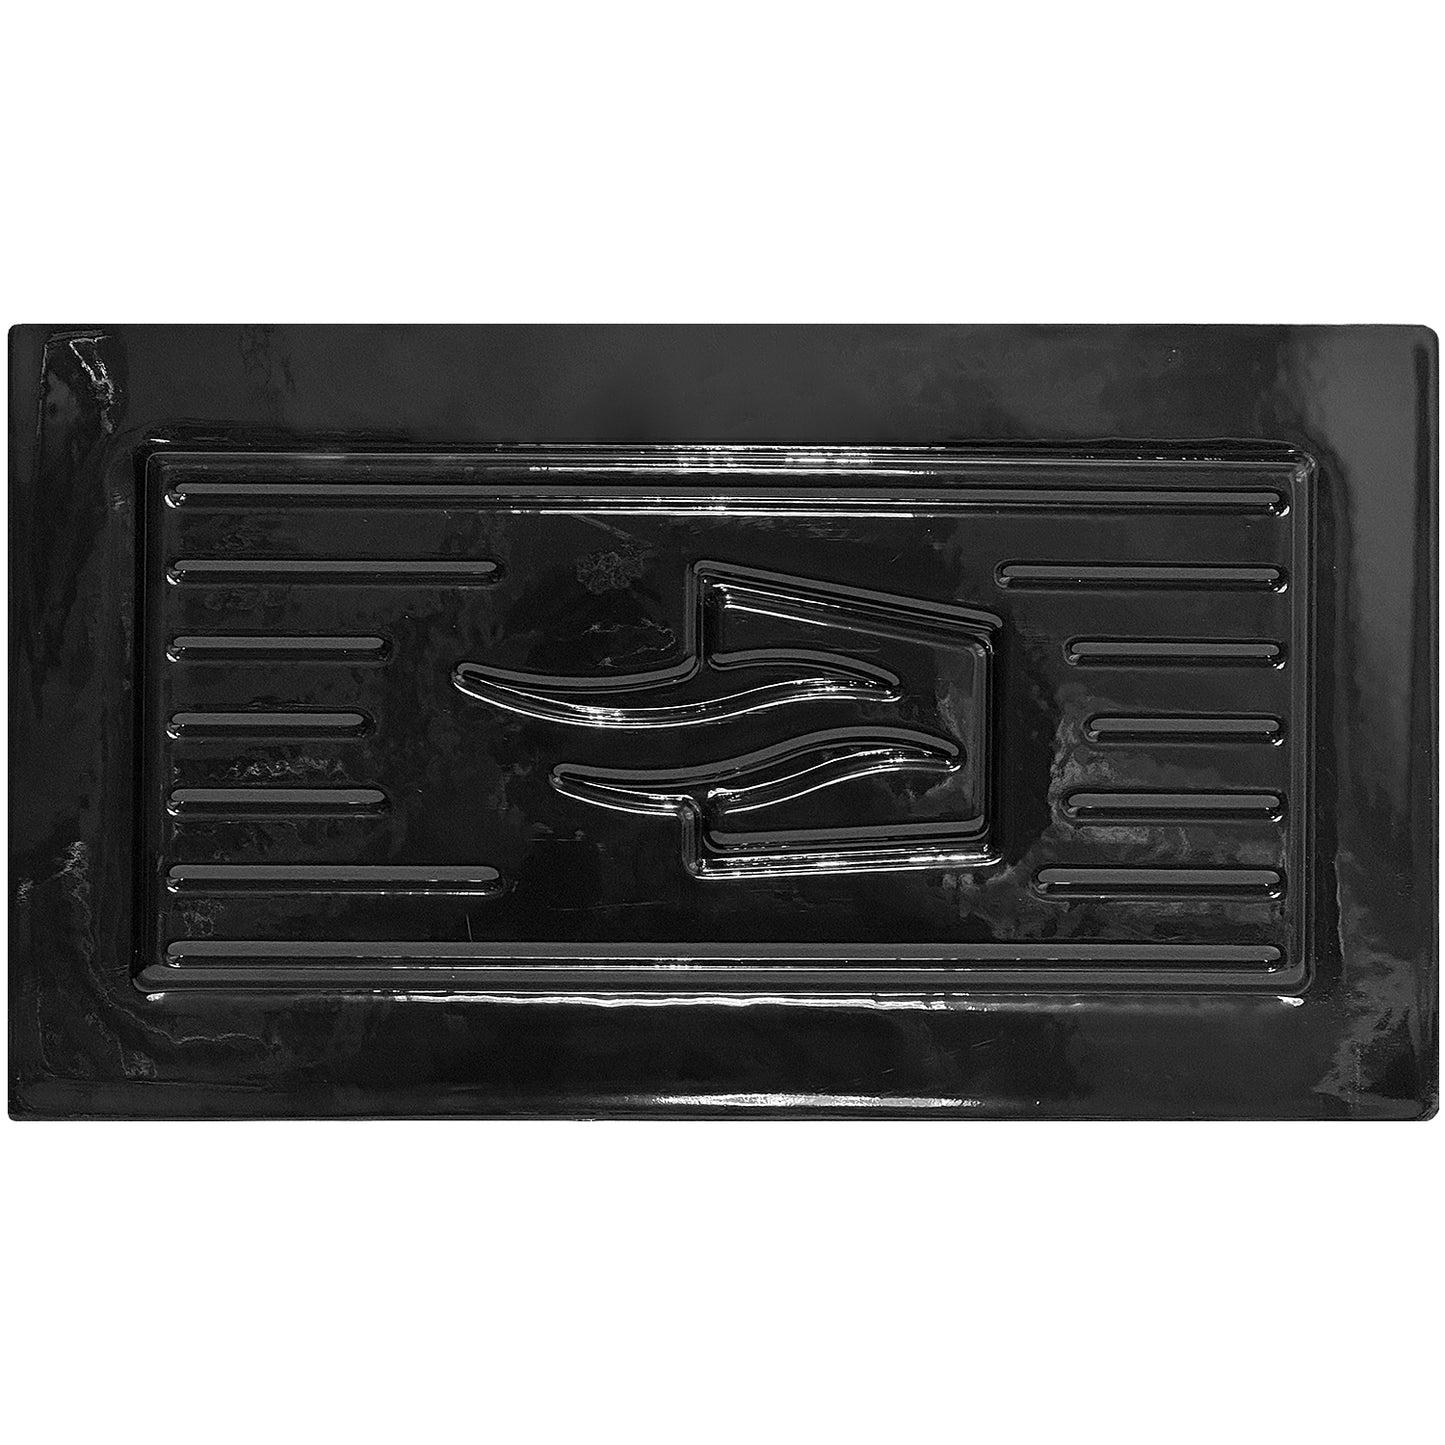 Back of shallow depth vent cover (black)